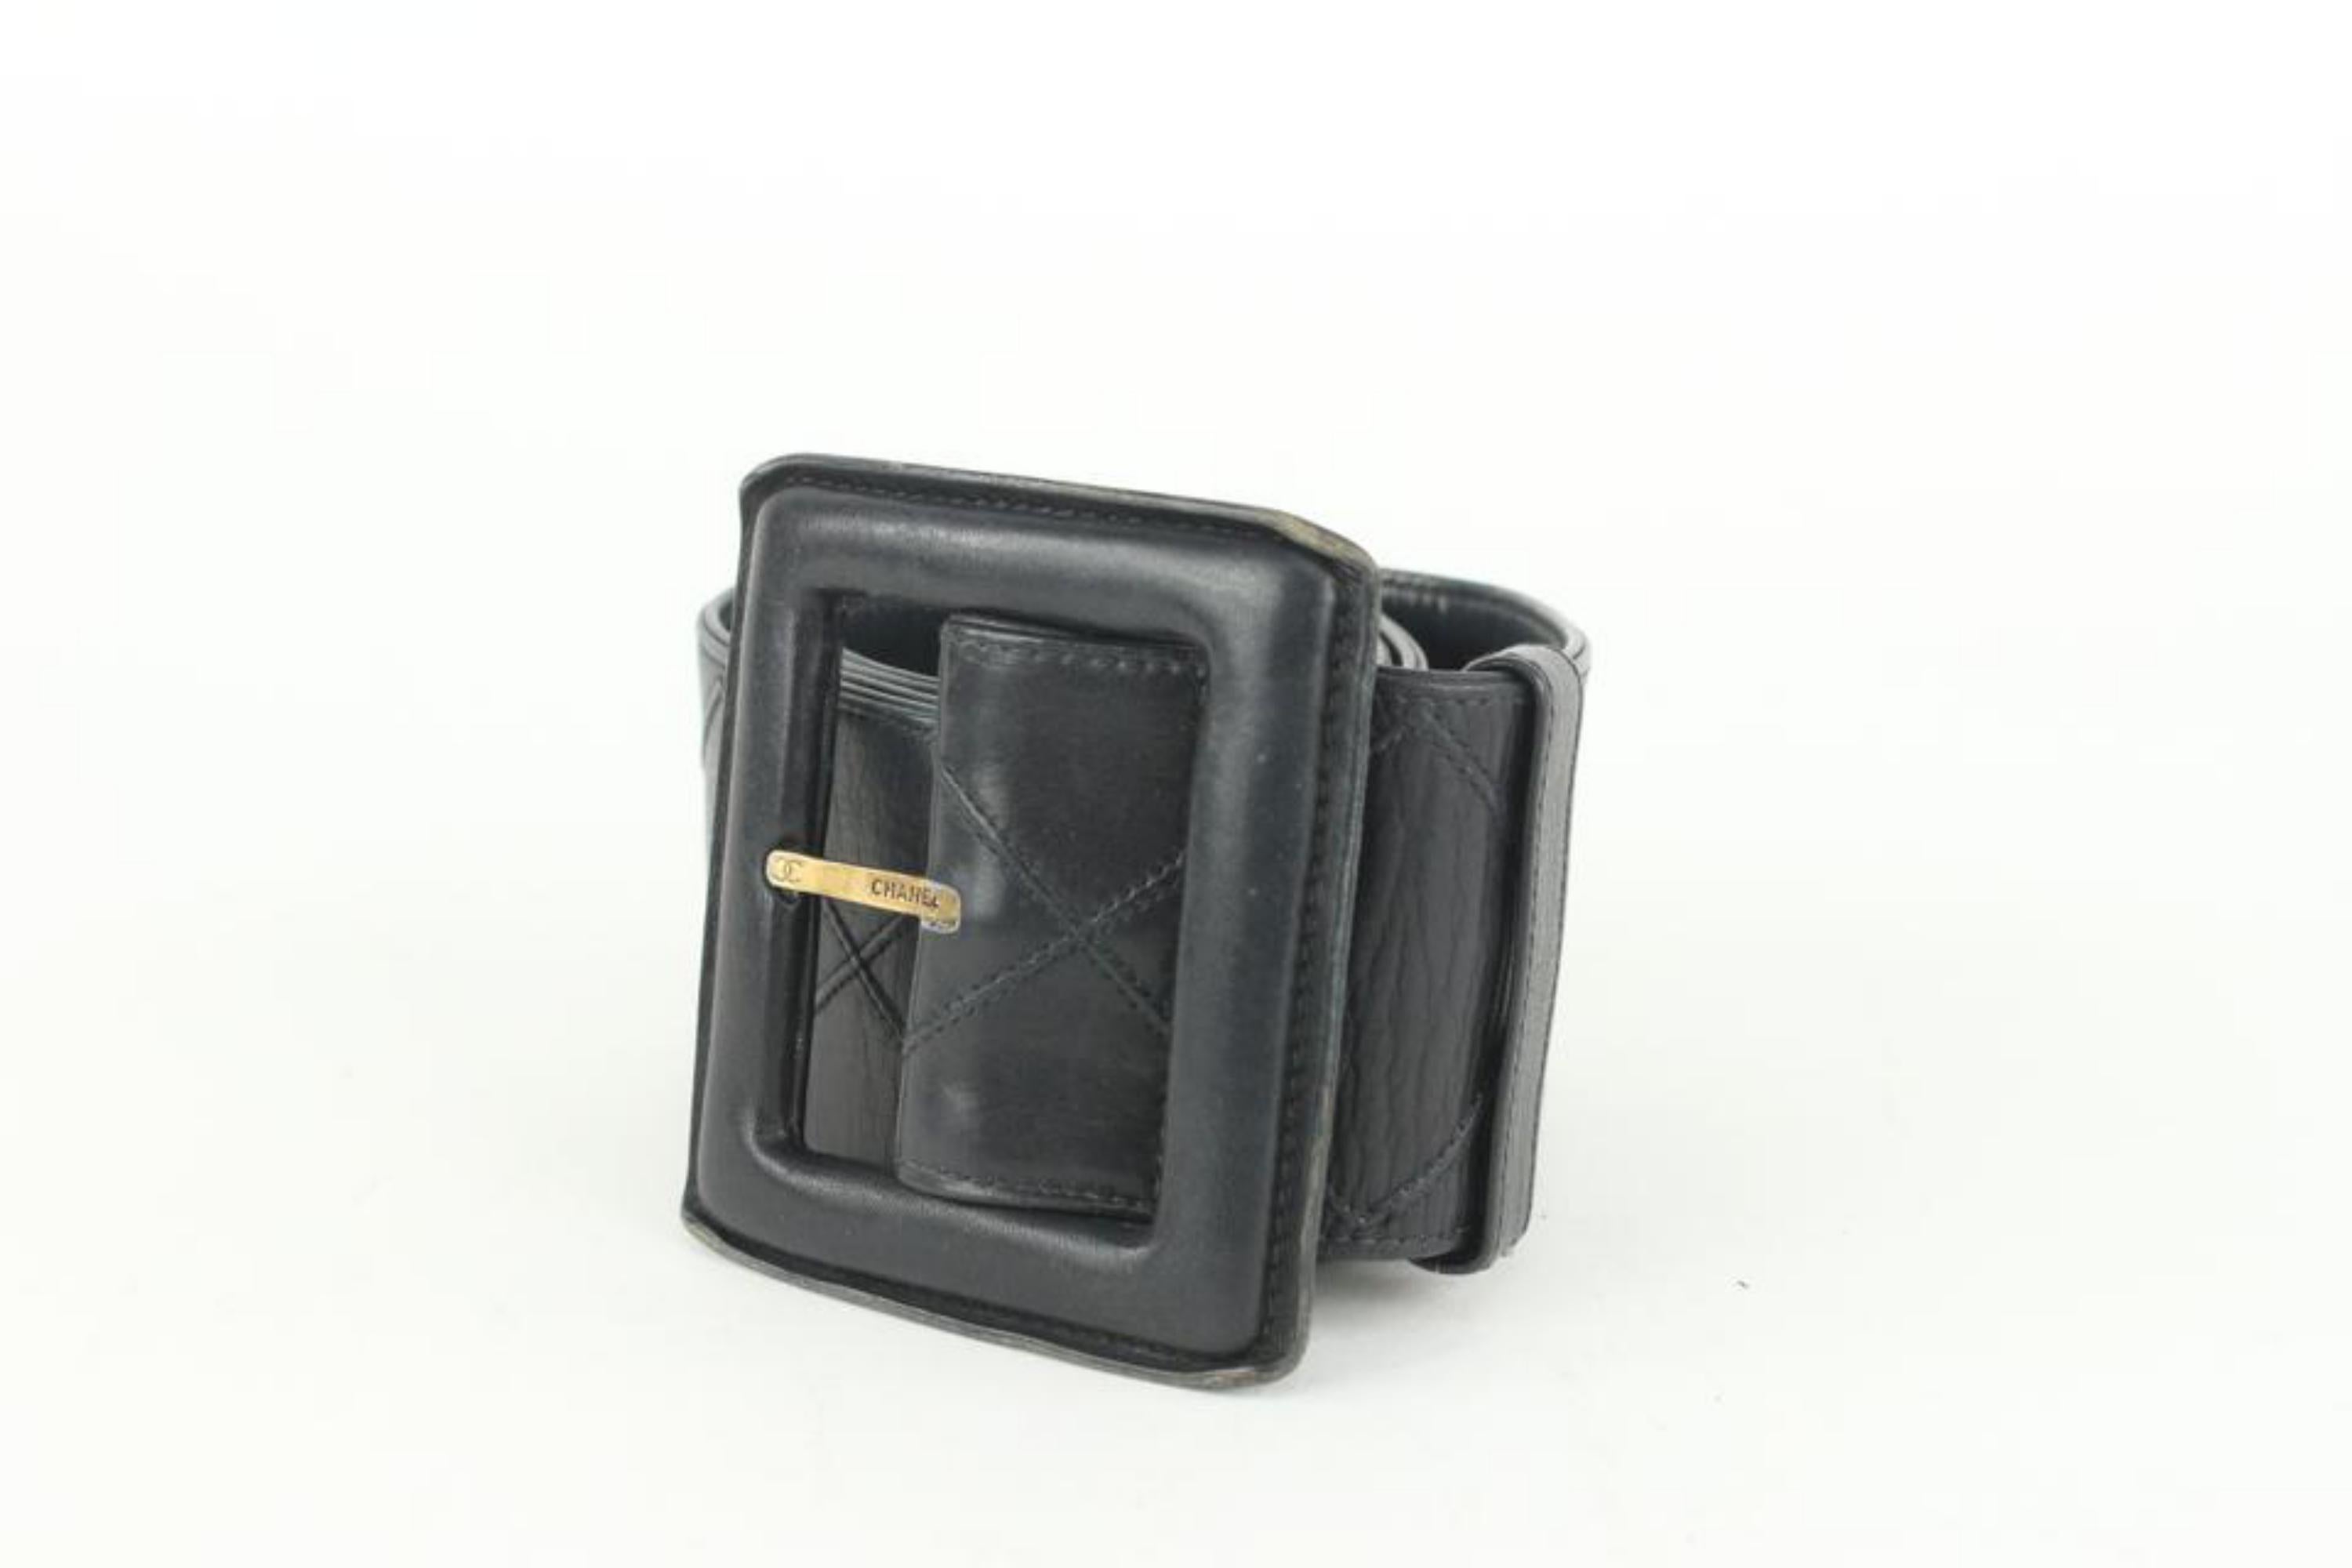 Chanel 80/32 Black Quilted Lambskin Belt 107c46 For Sale 8